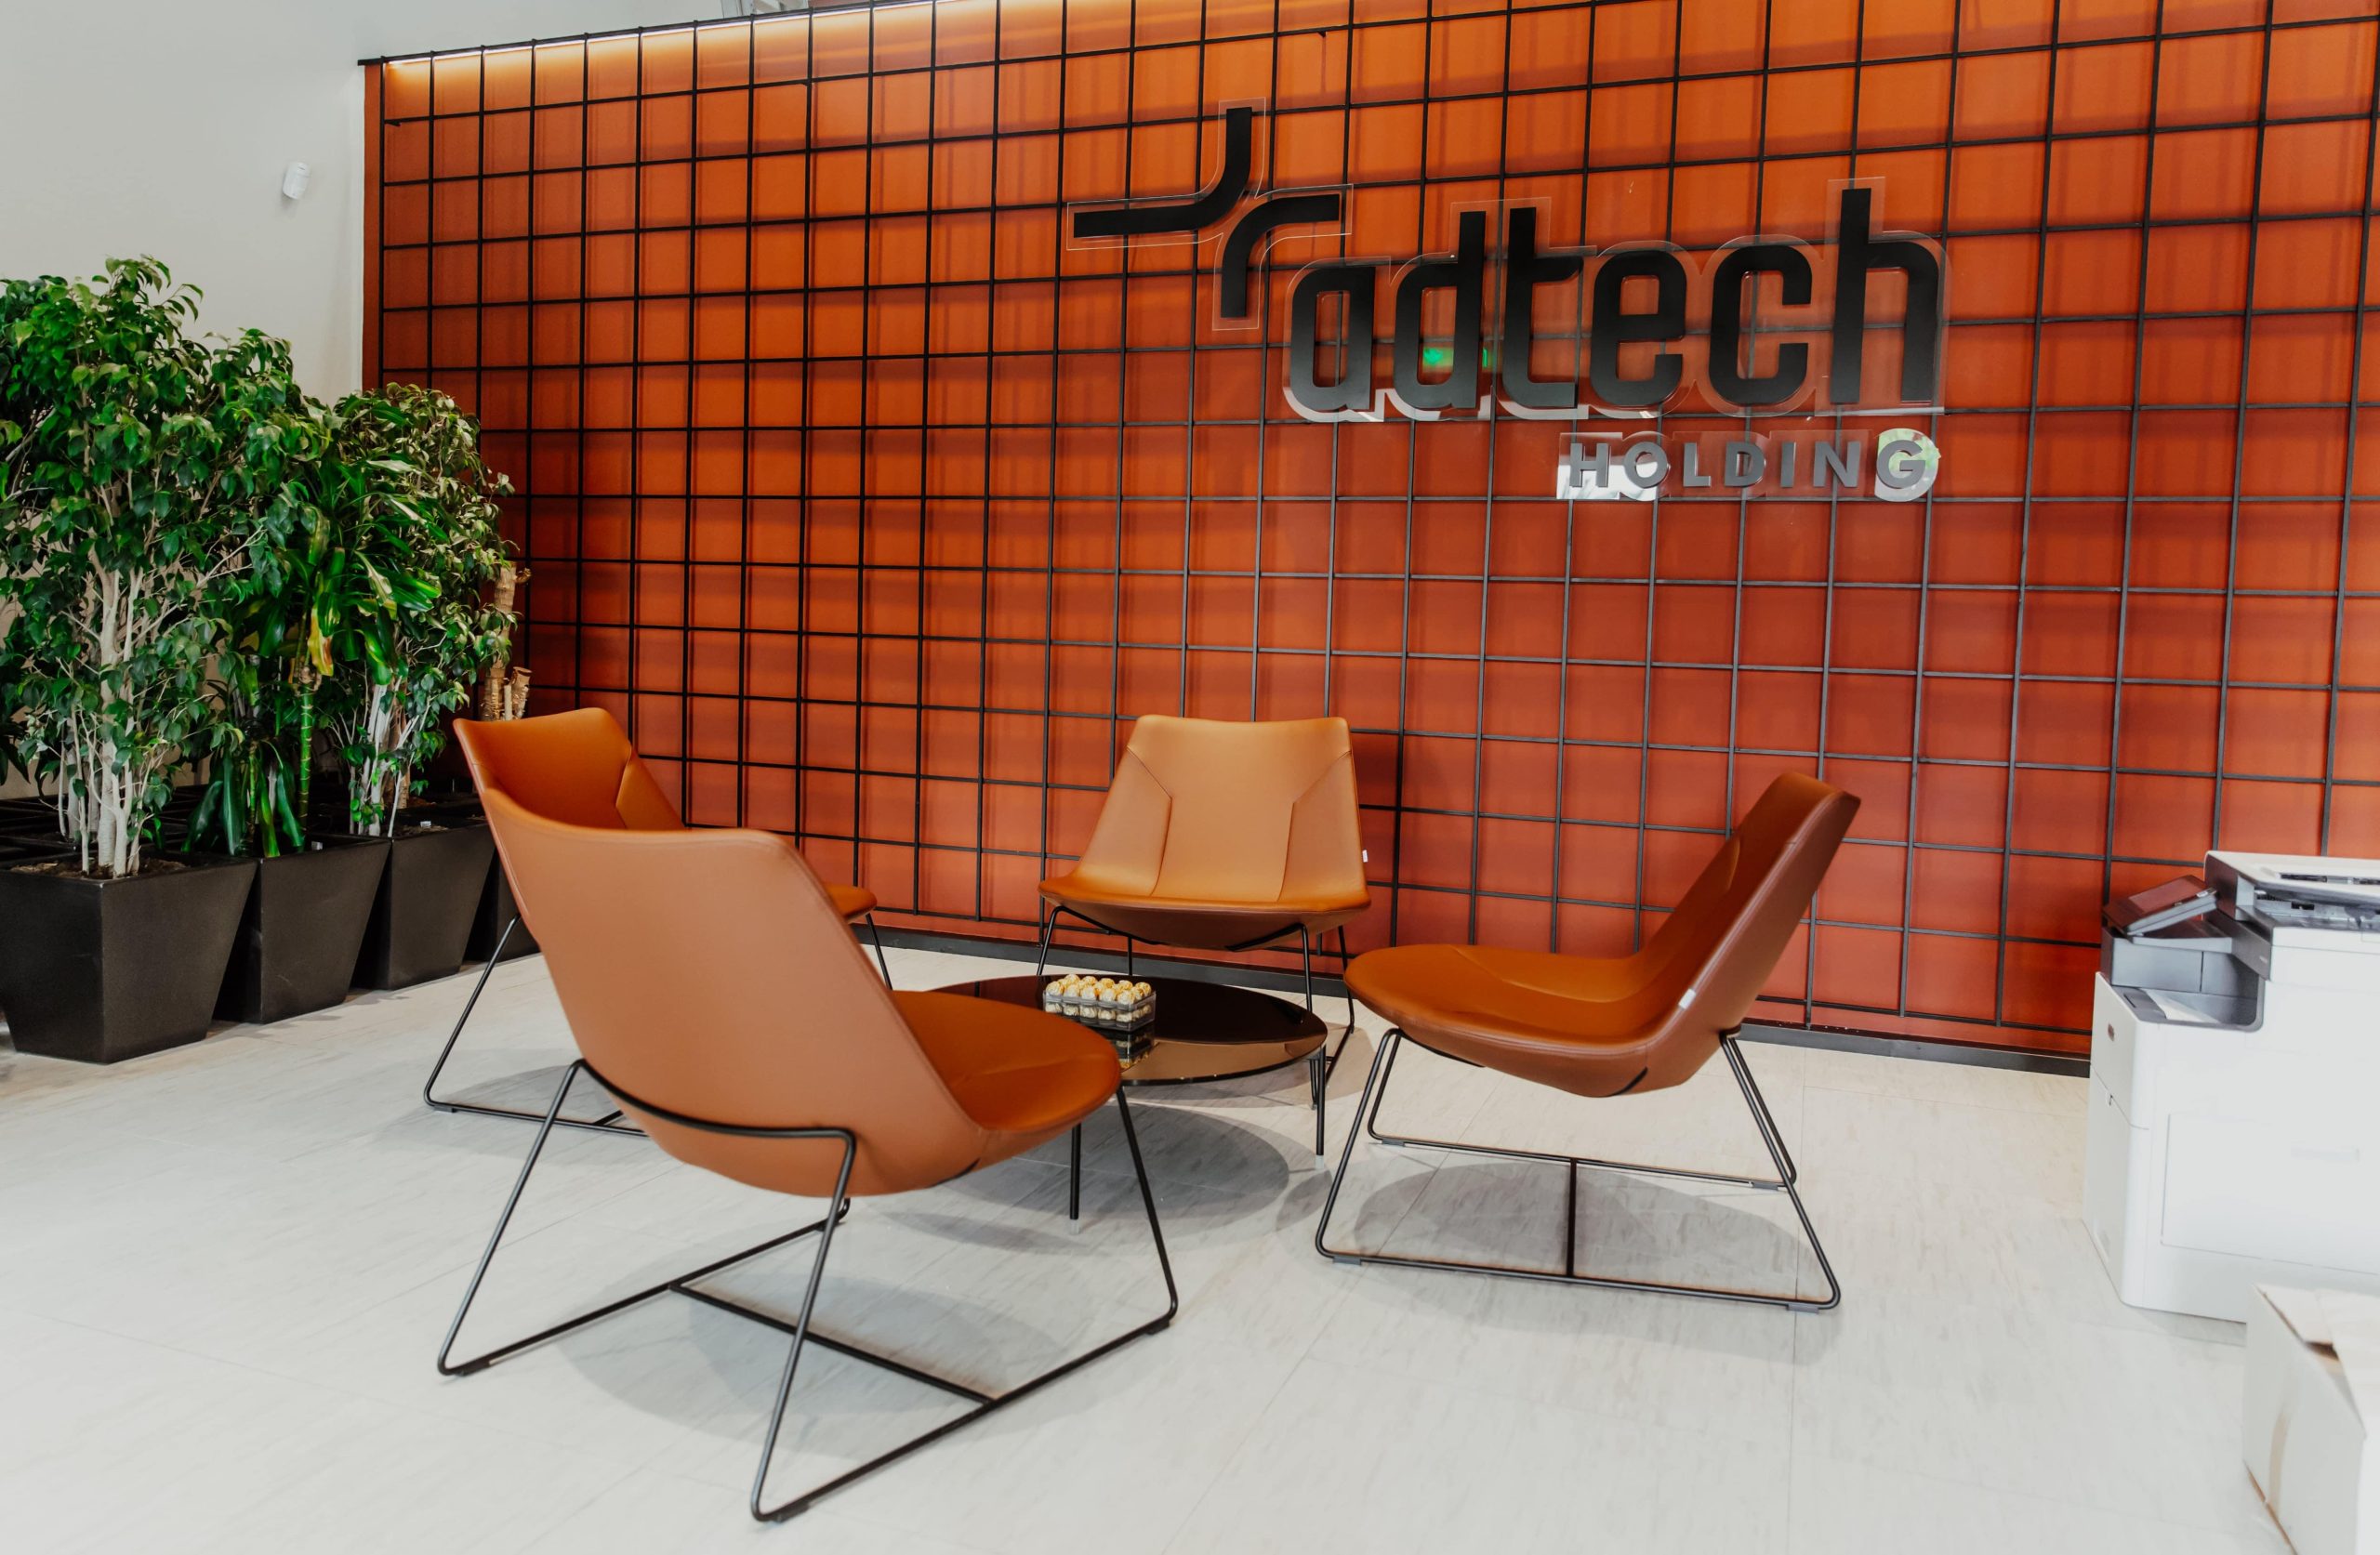 AdTech Holding new office